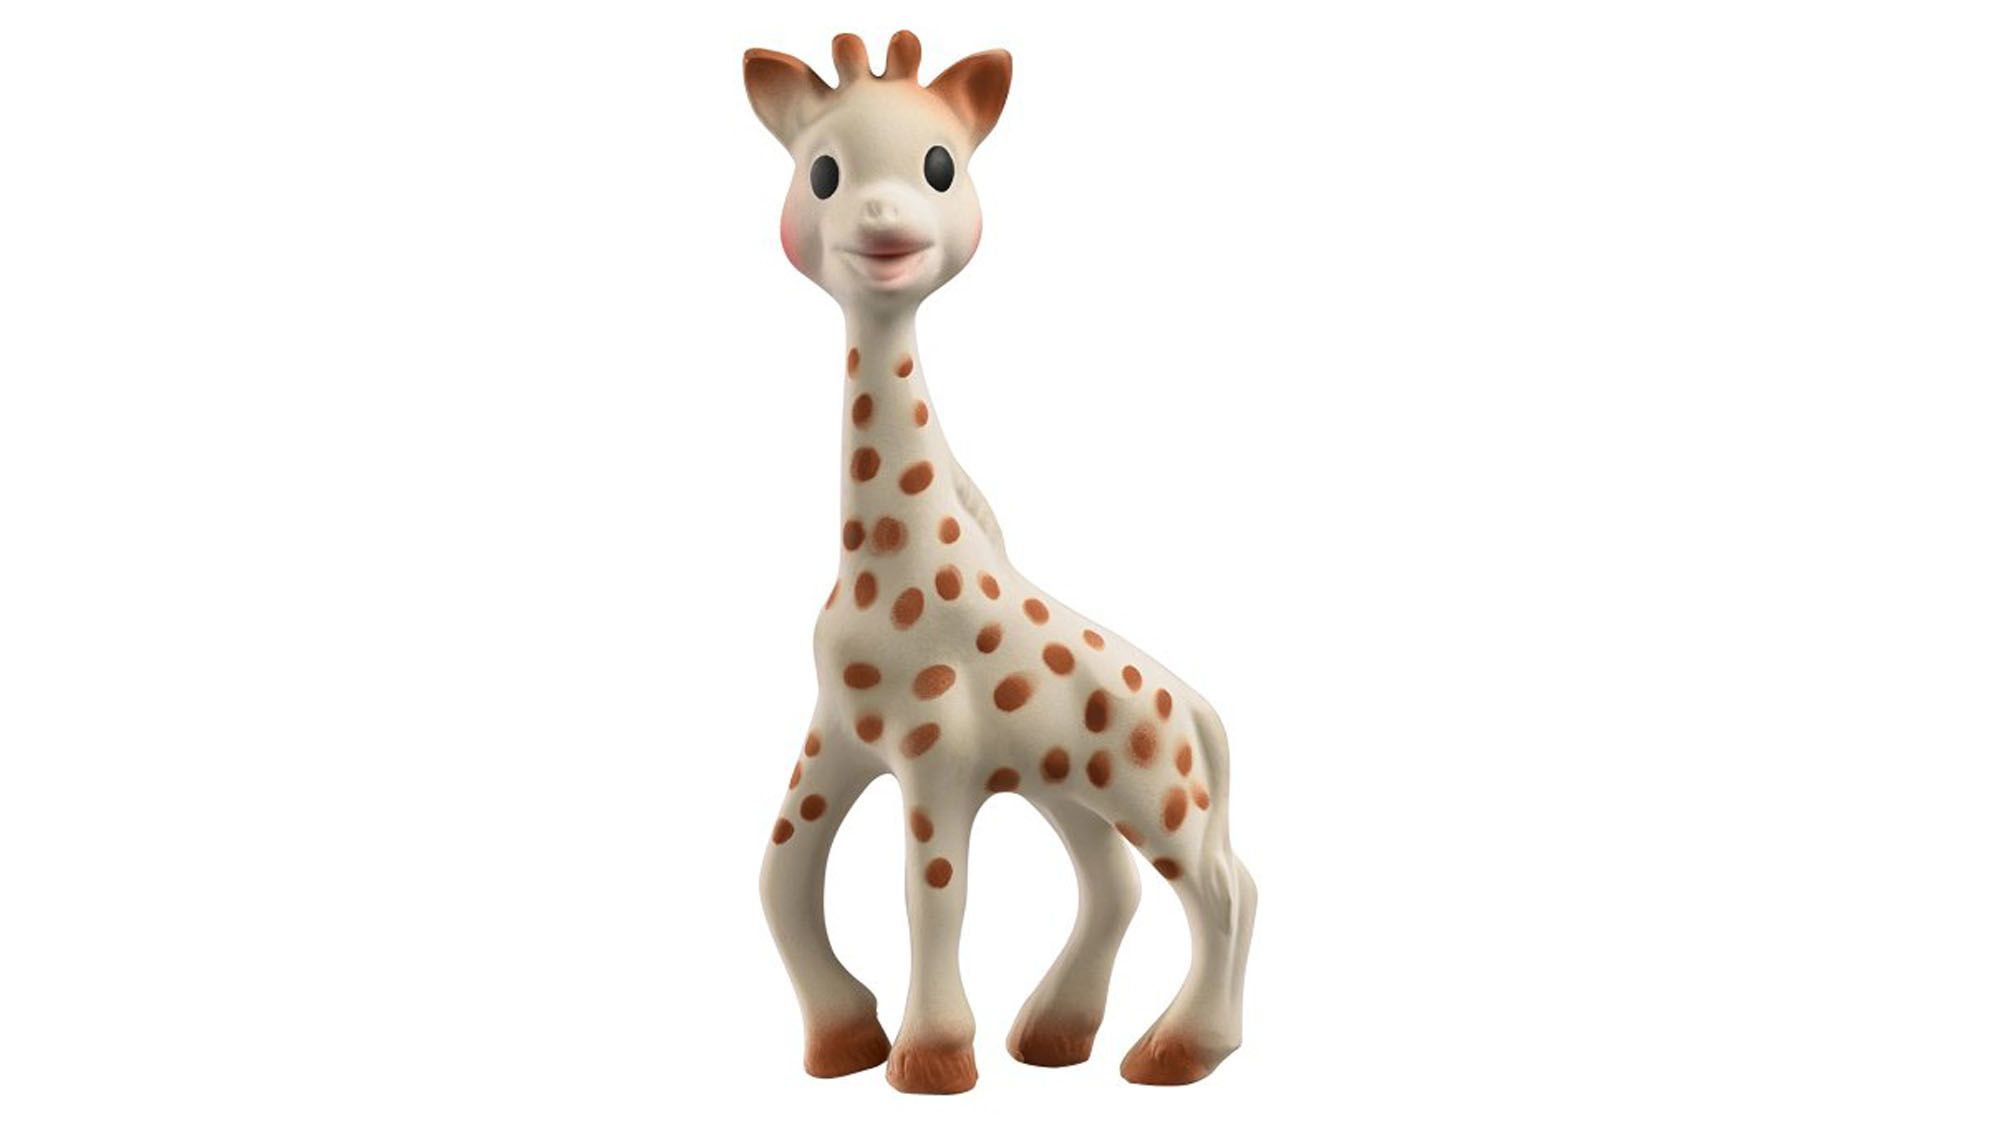 Sophie the Giraffe: Is mold reason to worry?